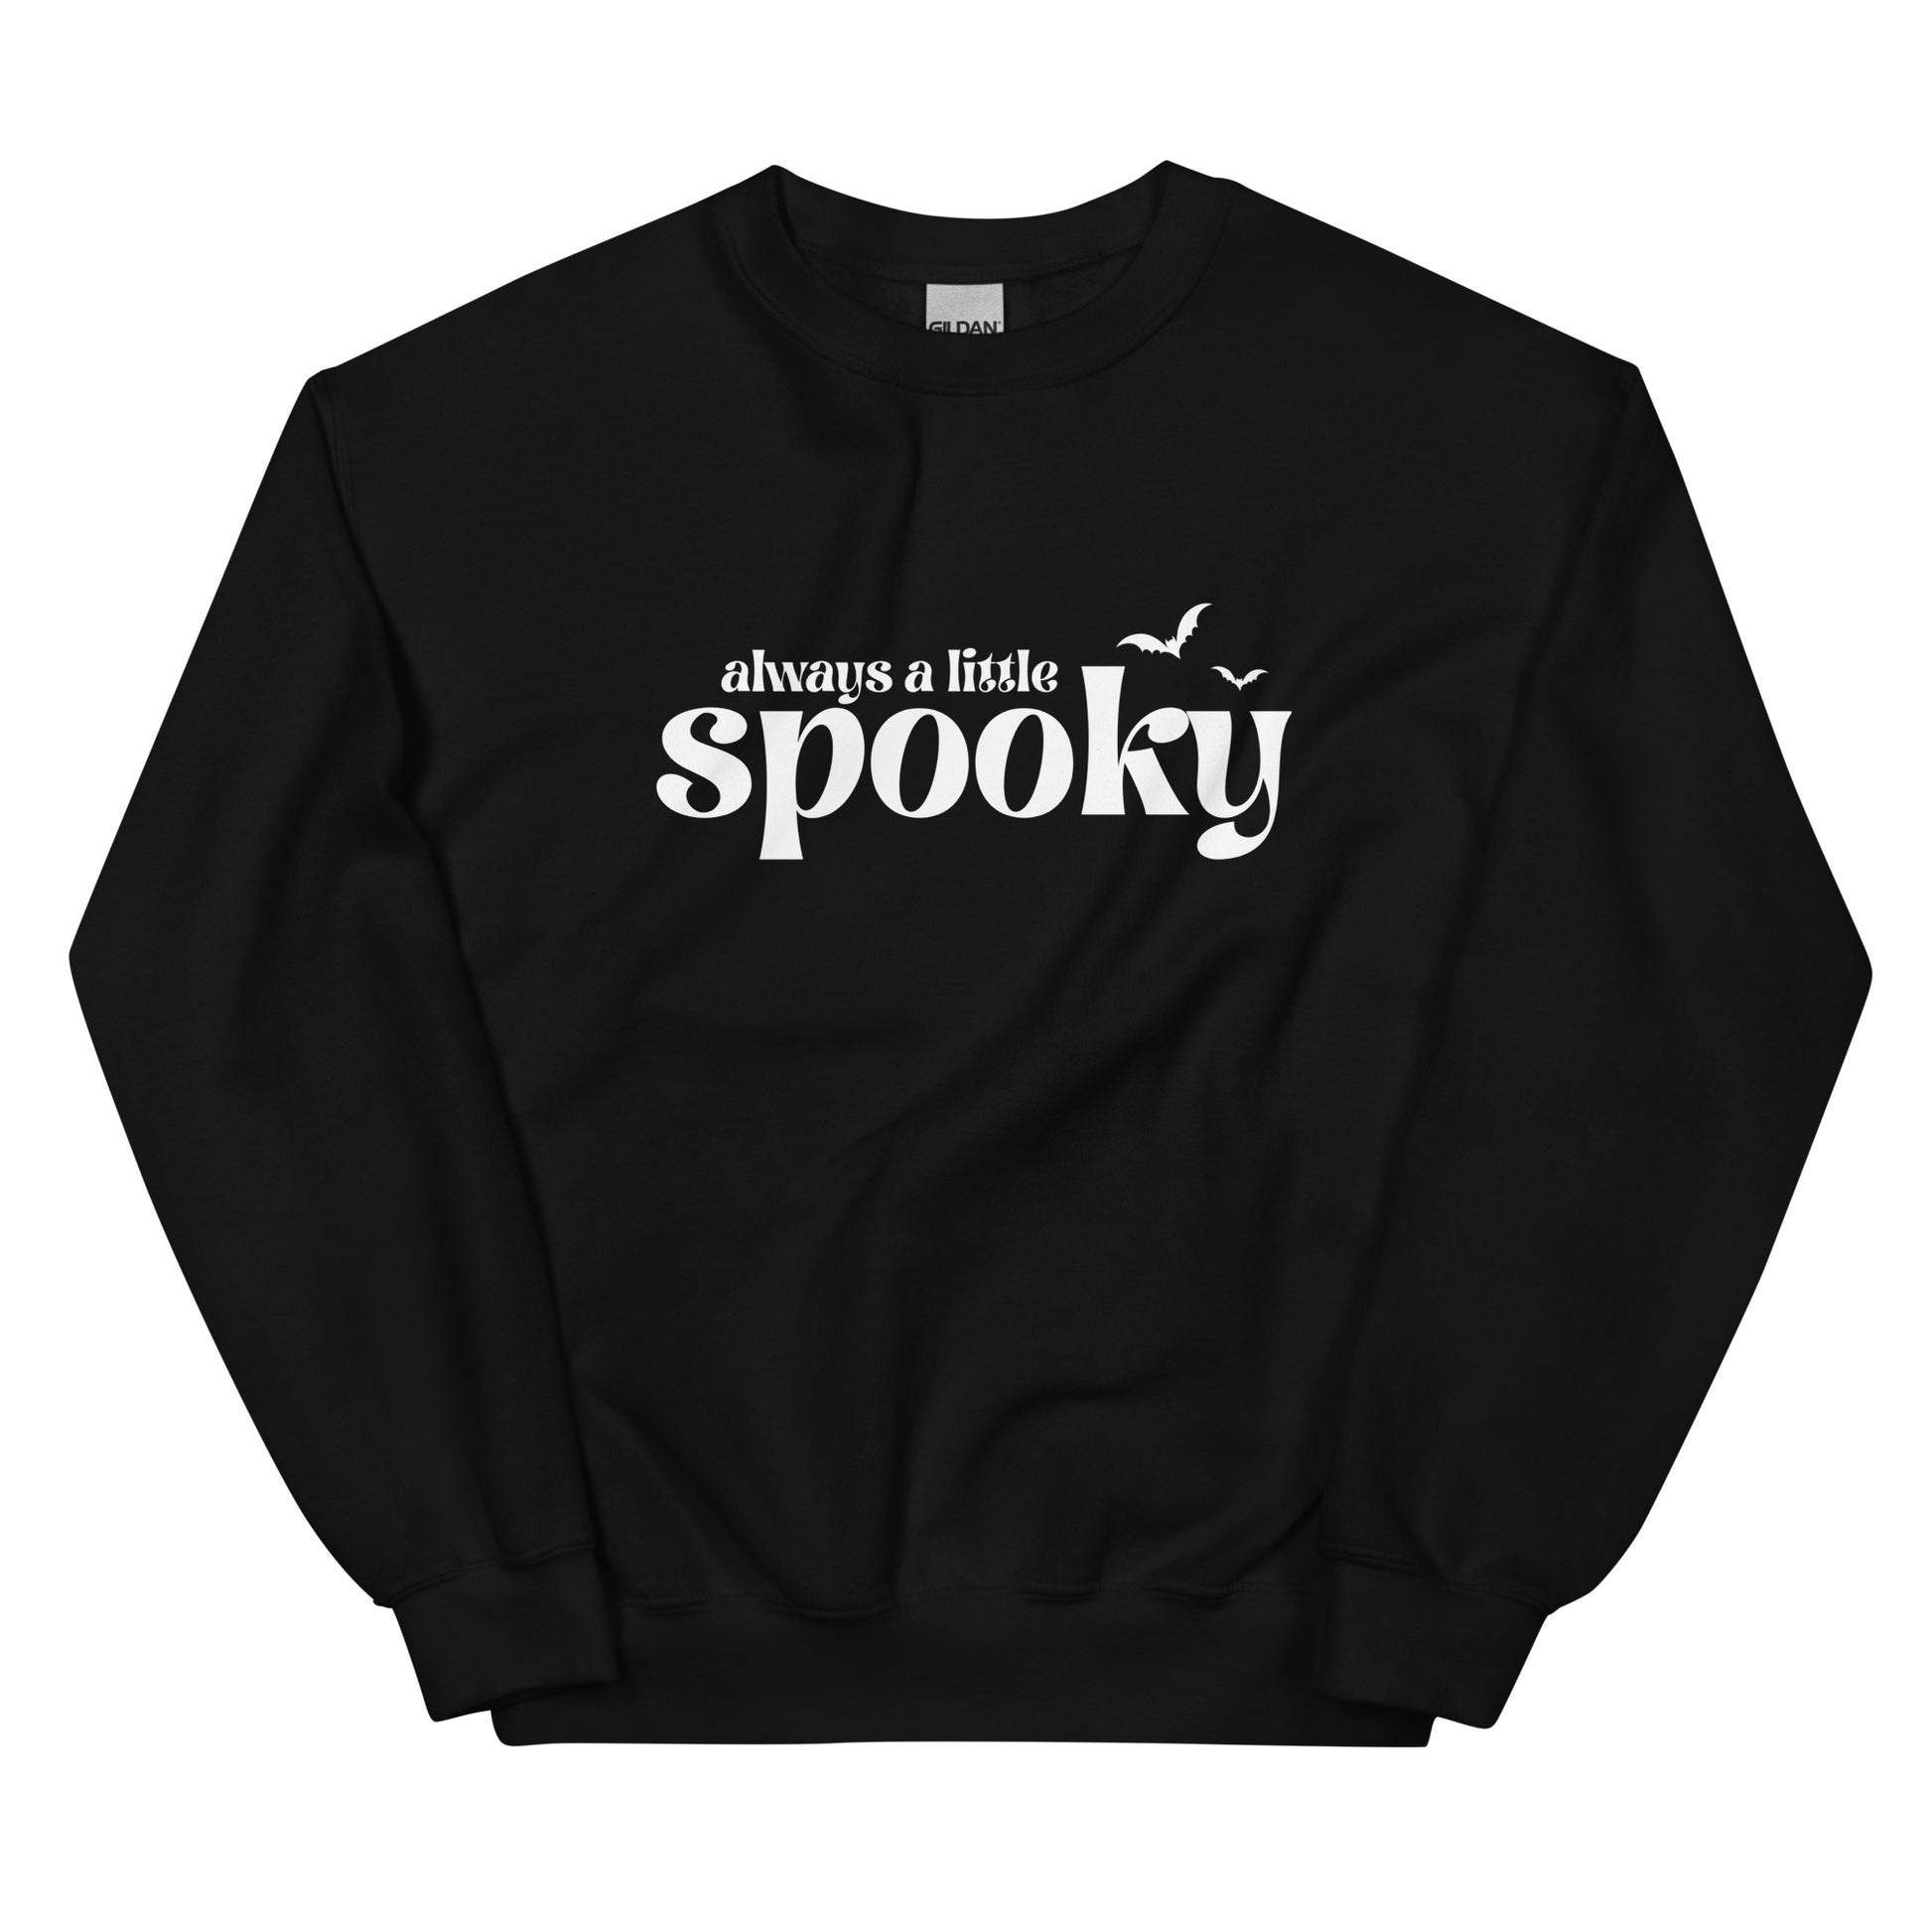 A black Halloween crewneck sweatshirt that says "always a little spooky" in a trendy white font